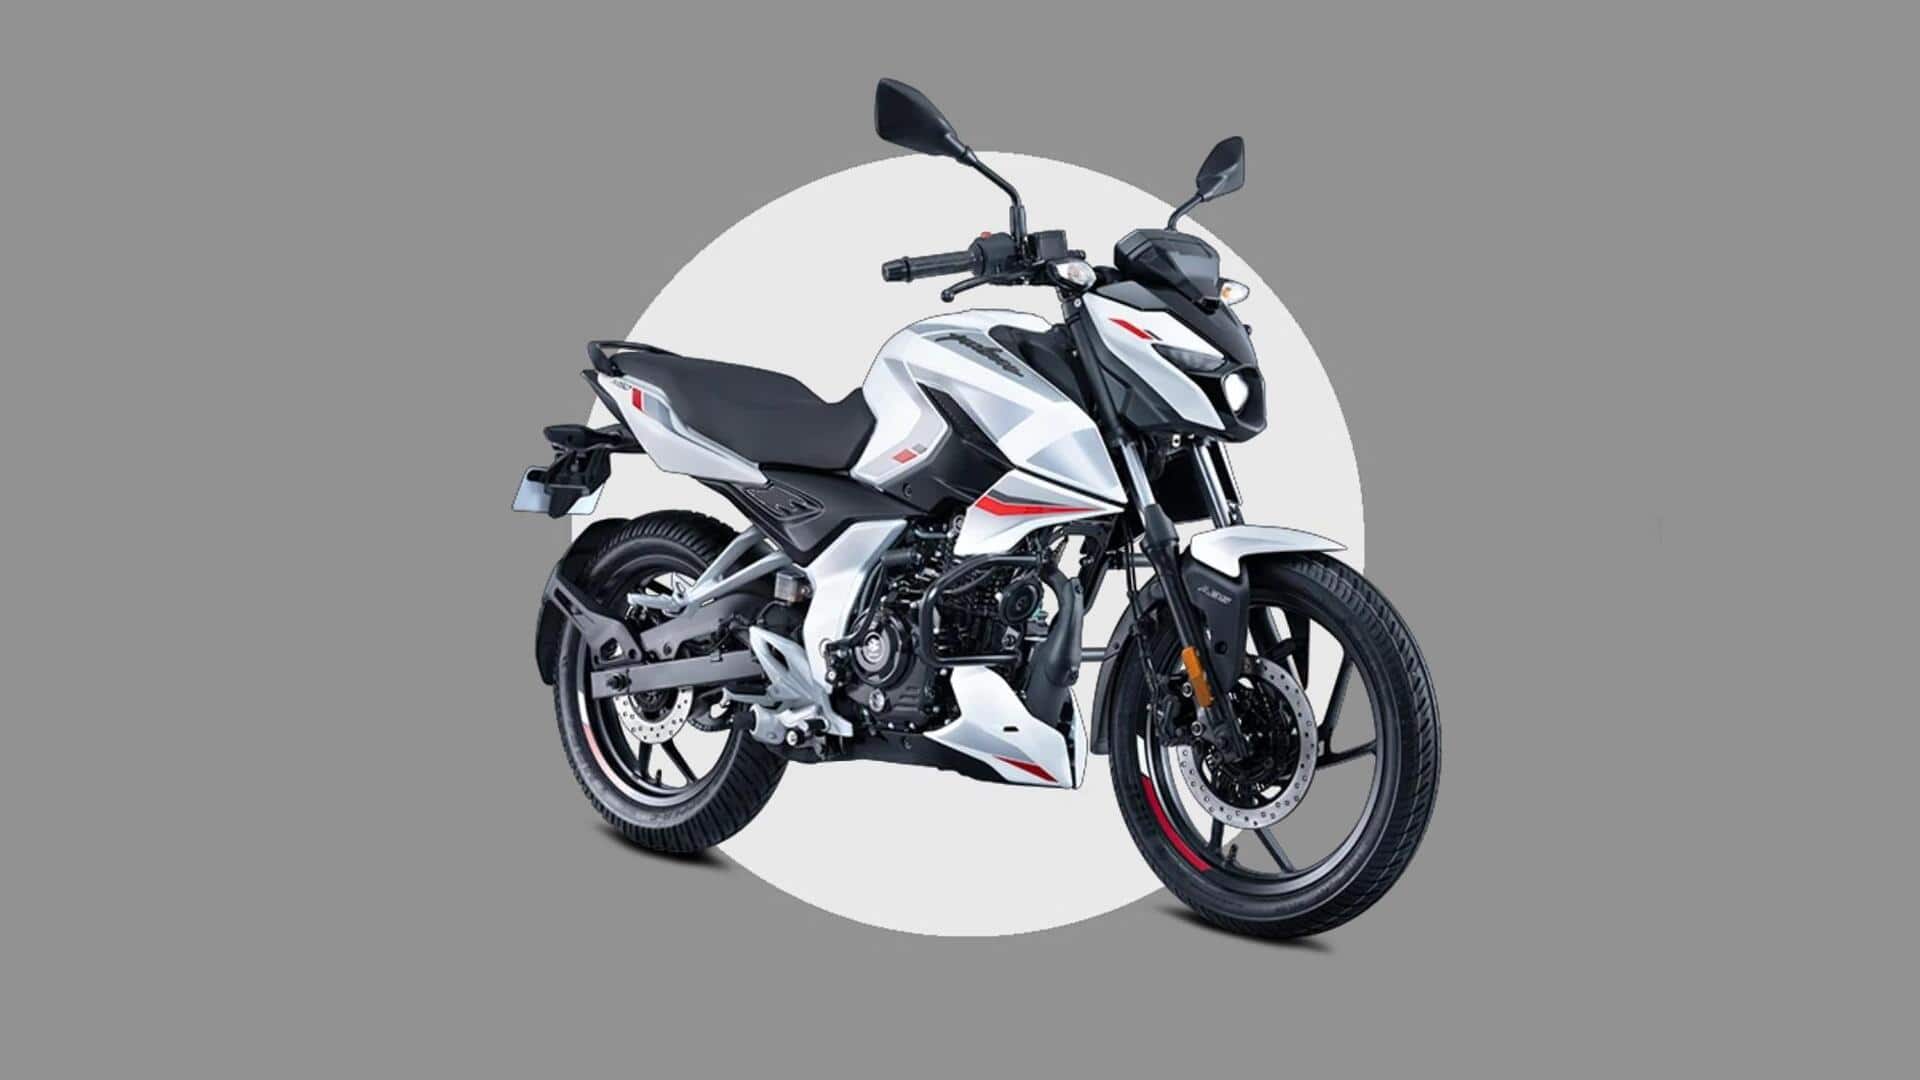 Bajaj Pulsar N125 spotted testing in India: What to expect